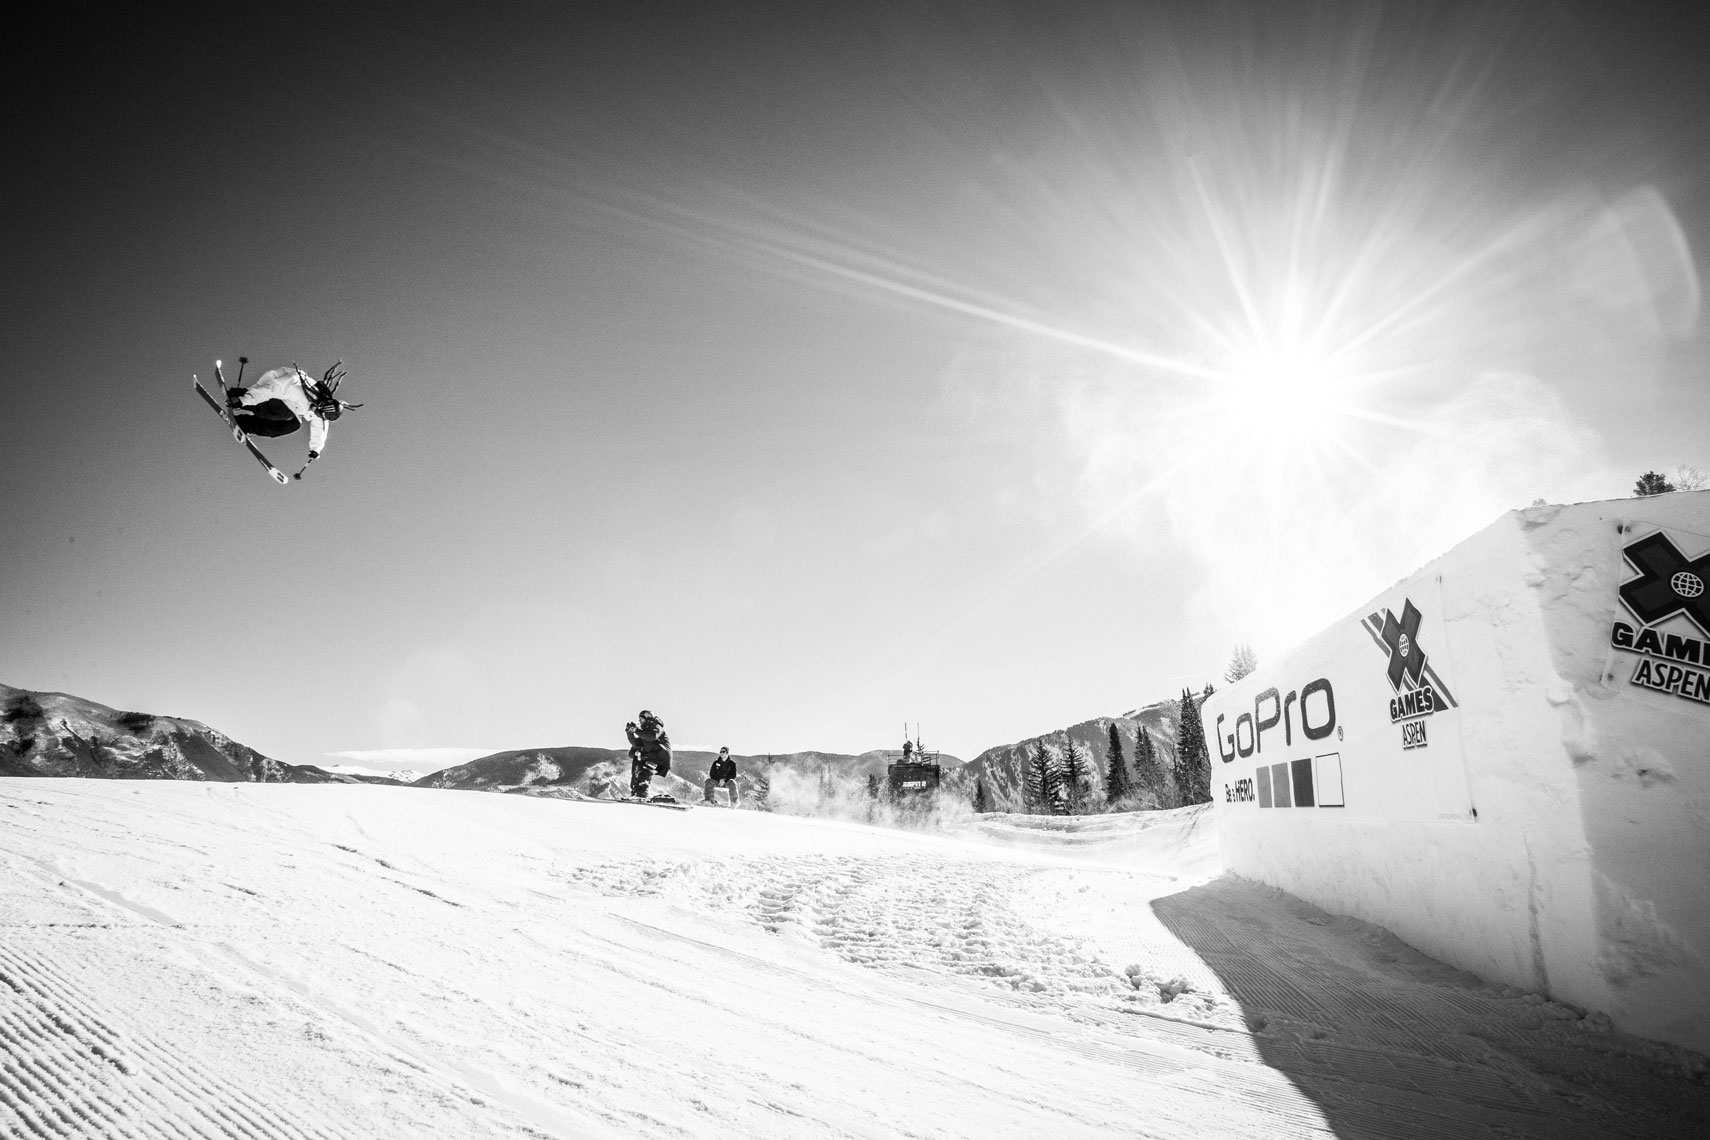 Winter X Games Action Sports Photographer